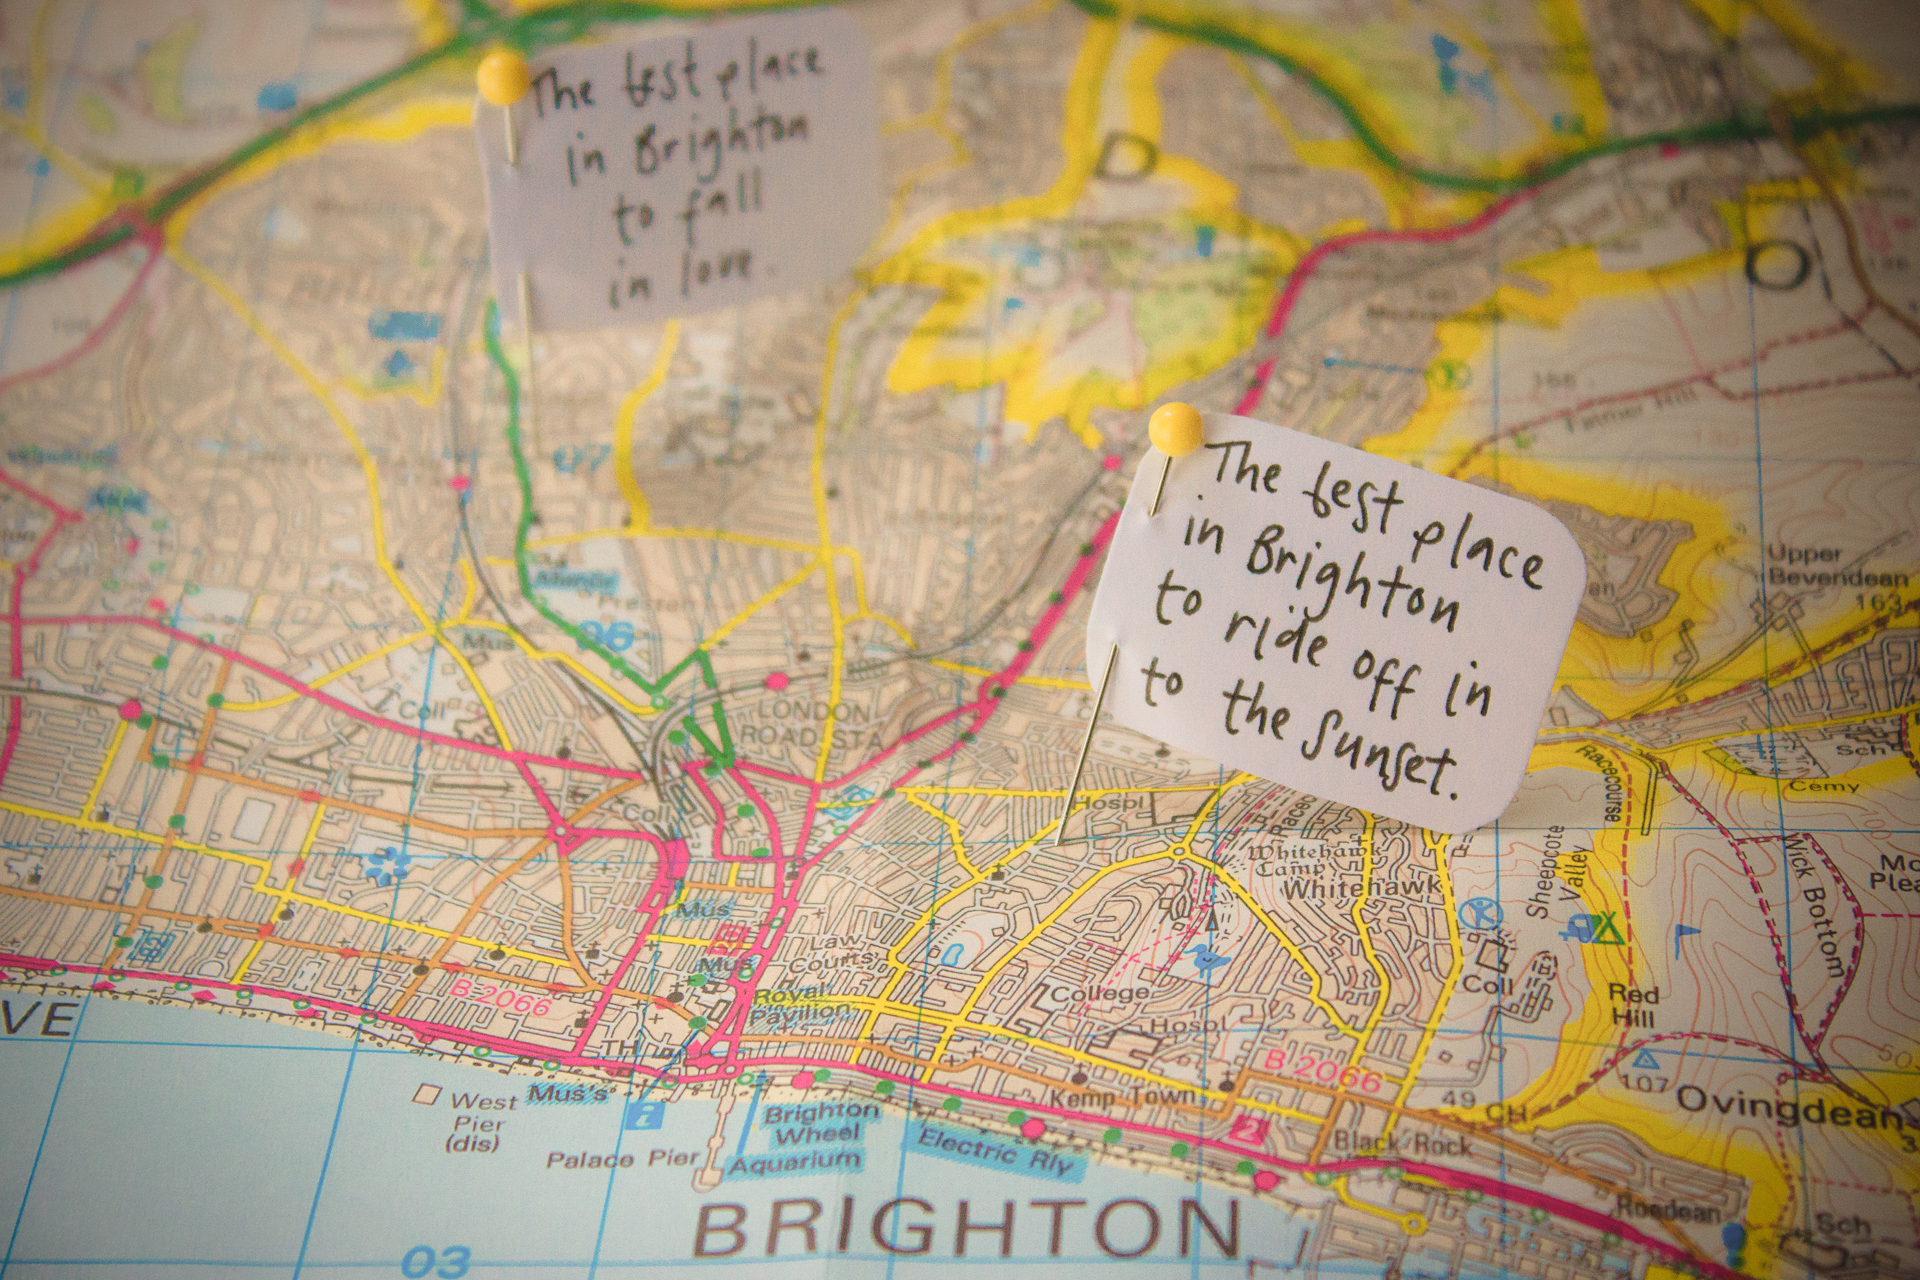 A map of Brighton with a push-pin flag stuck in it, showing the 'best place to ride off into the sunset' (Fortnight).